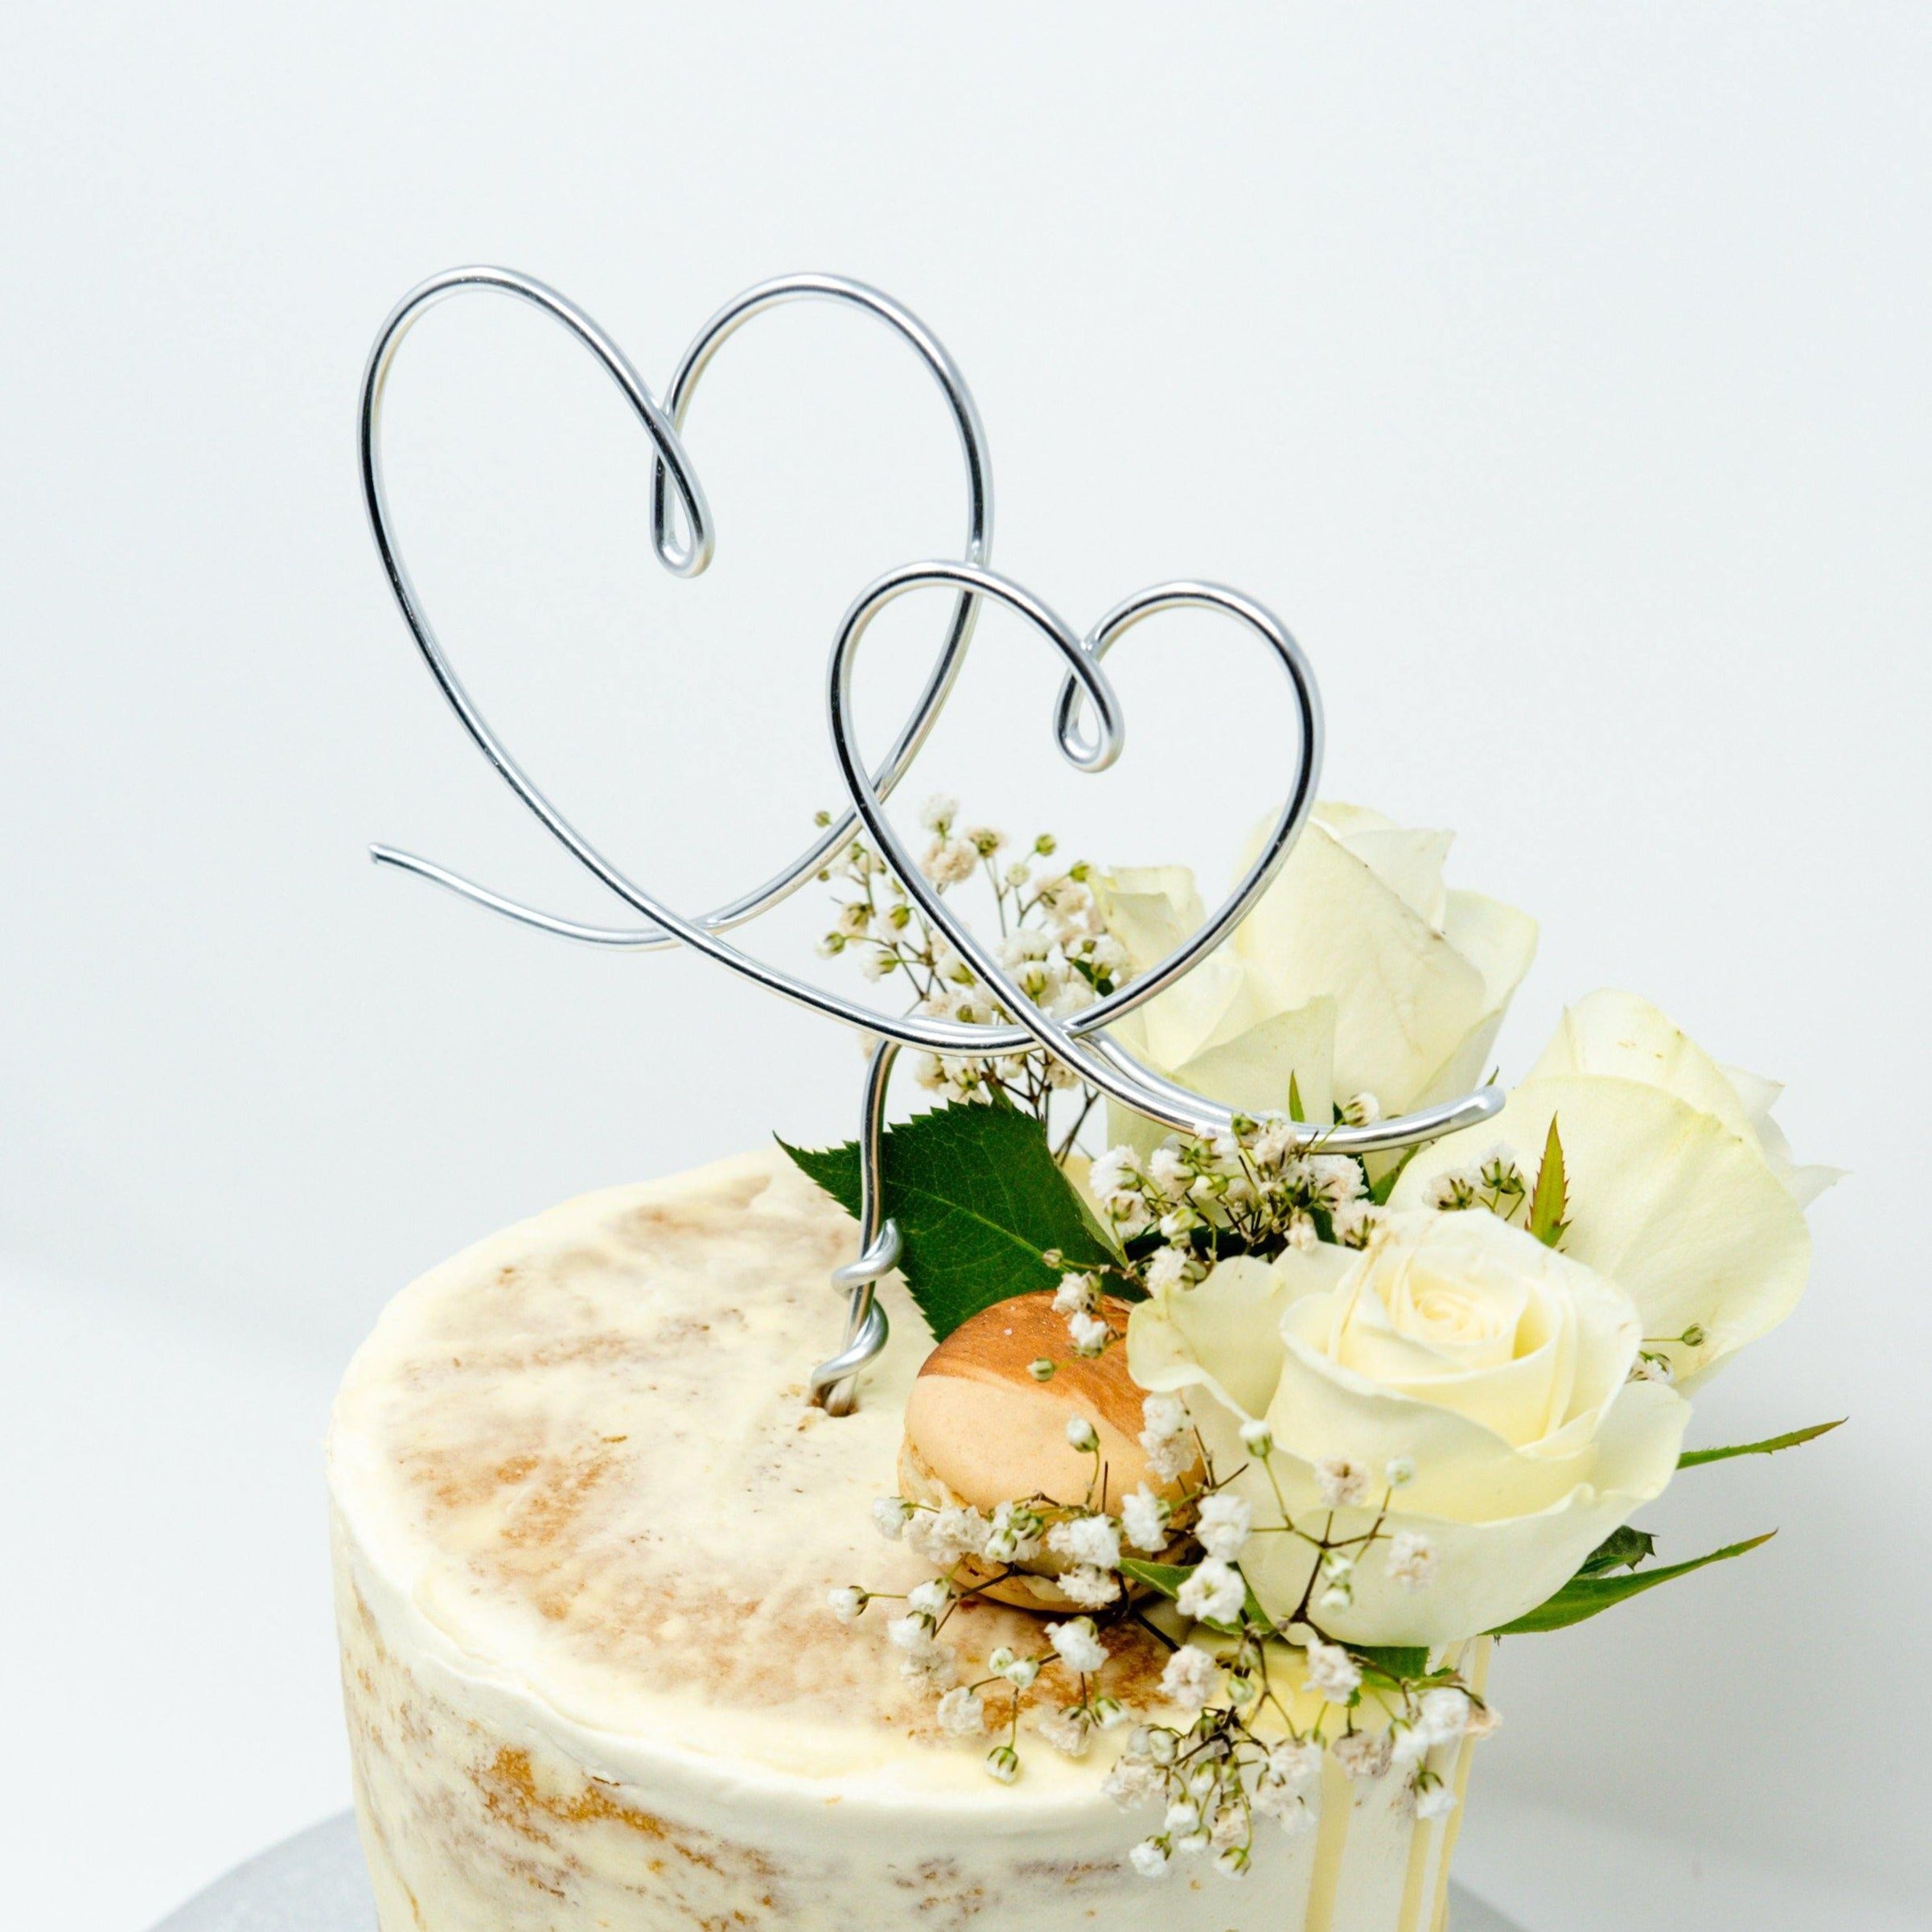 The double heart cake in 2023 | Cake, Heart cake, Engagement cakes